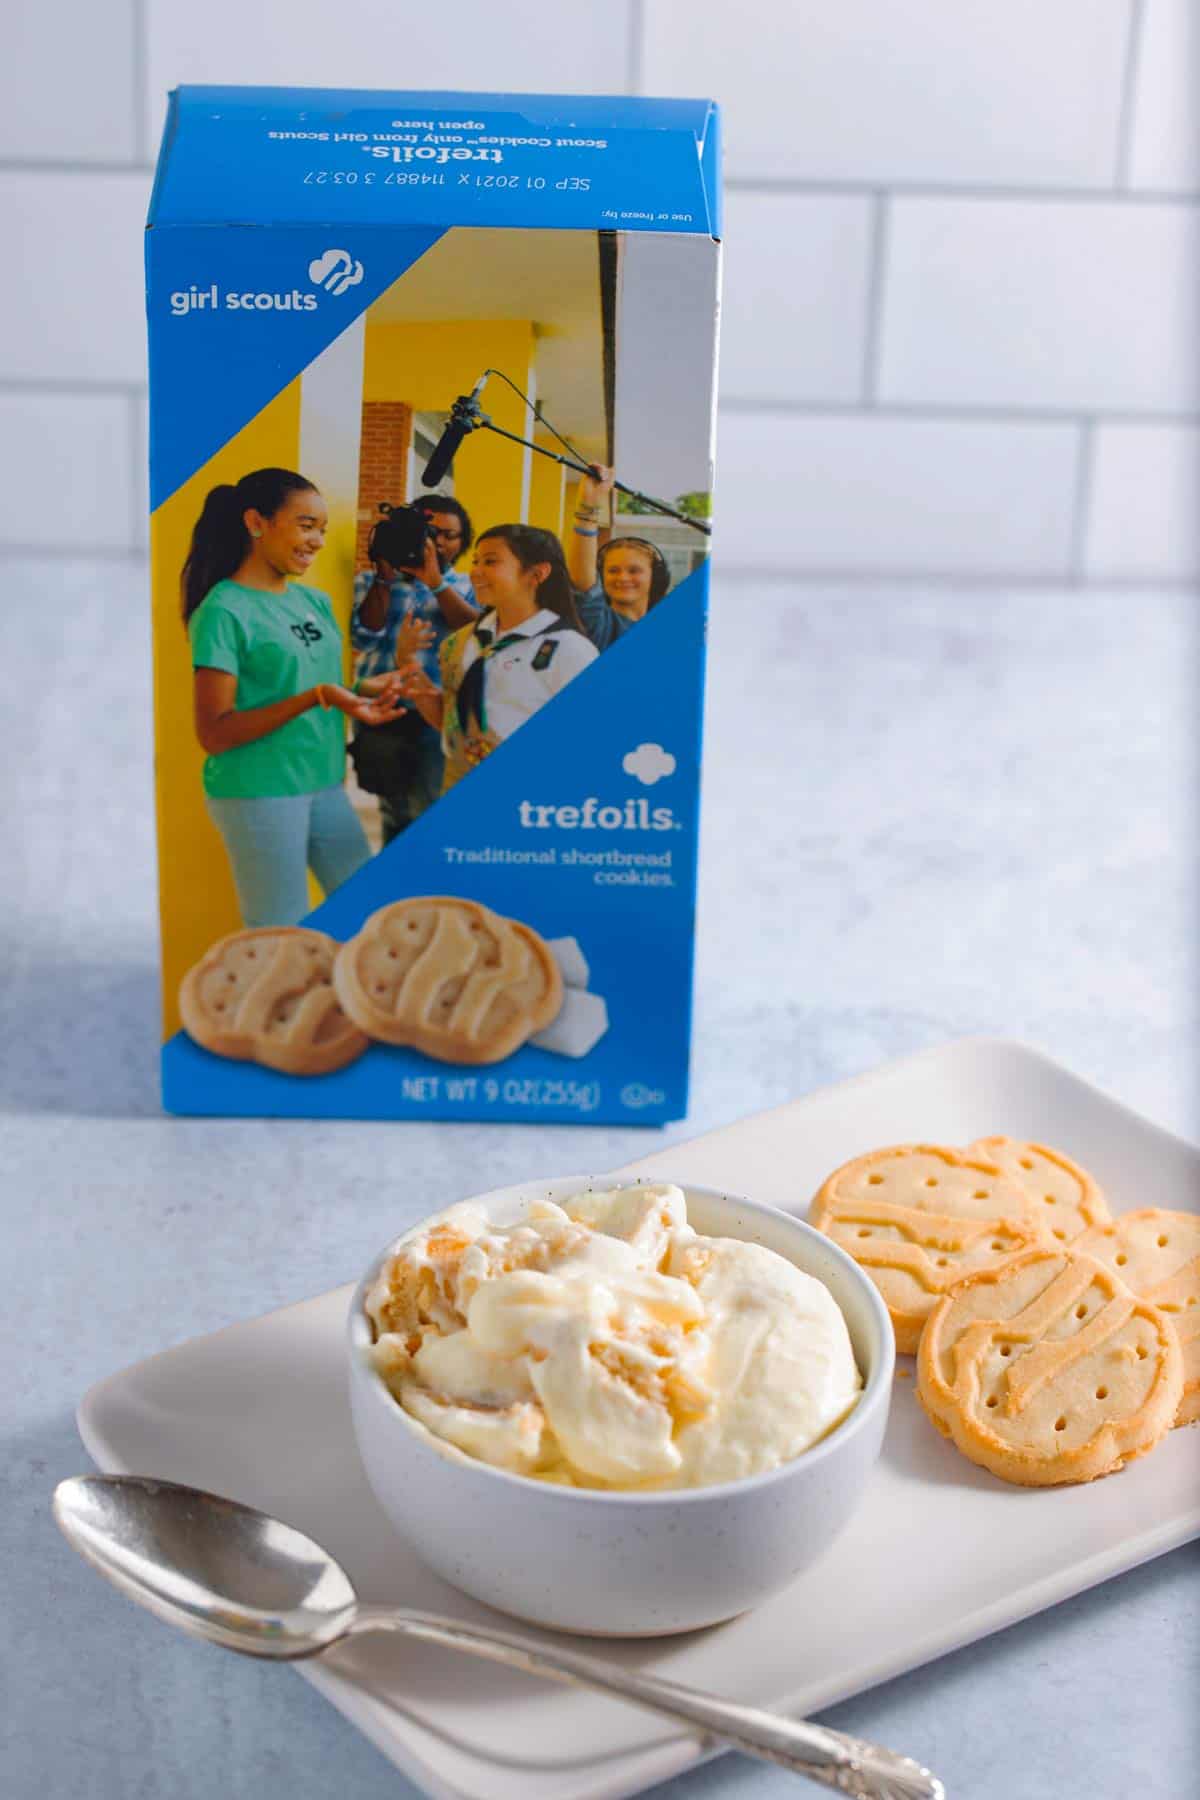 A bowl of banana pudding made with trefoils shortbread cookies with a box of Girl Scout trefoils in the background.